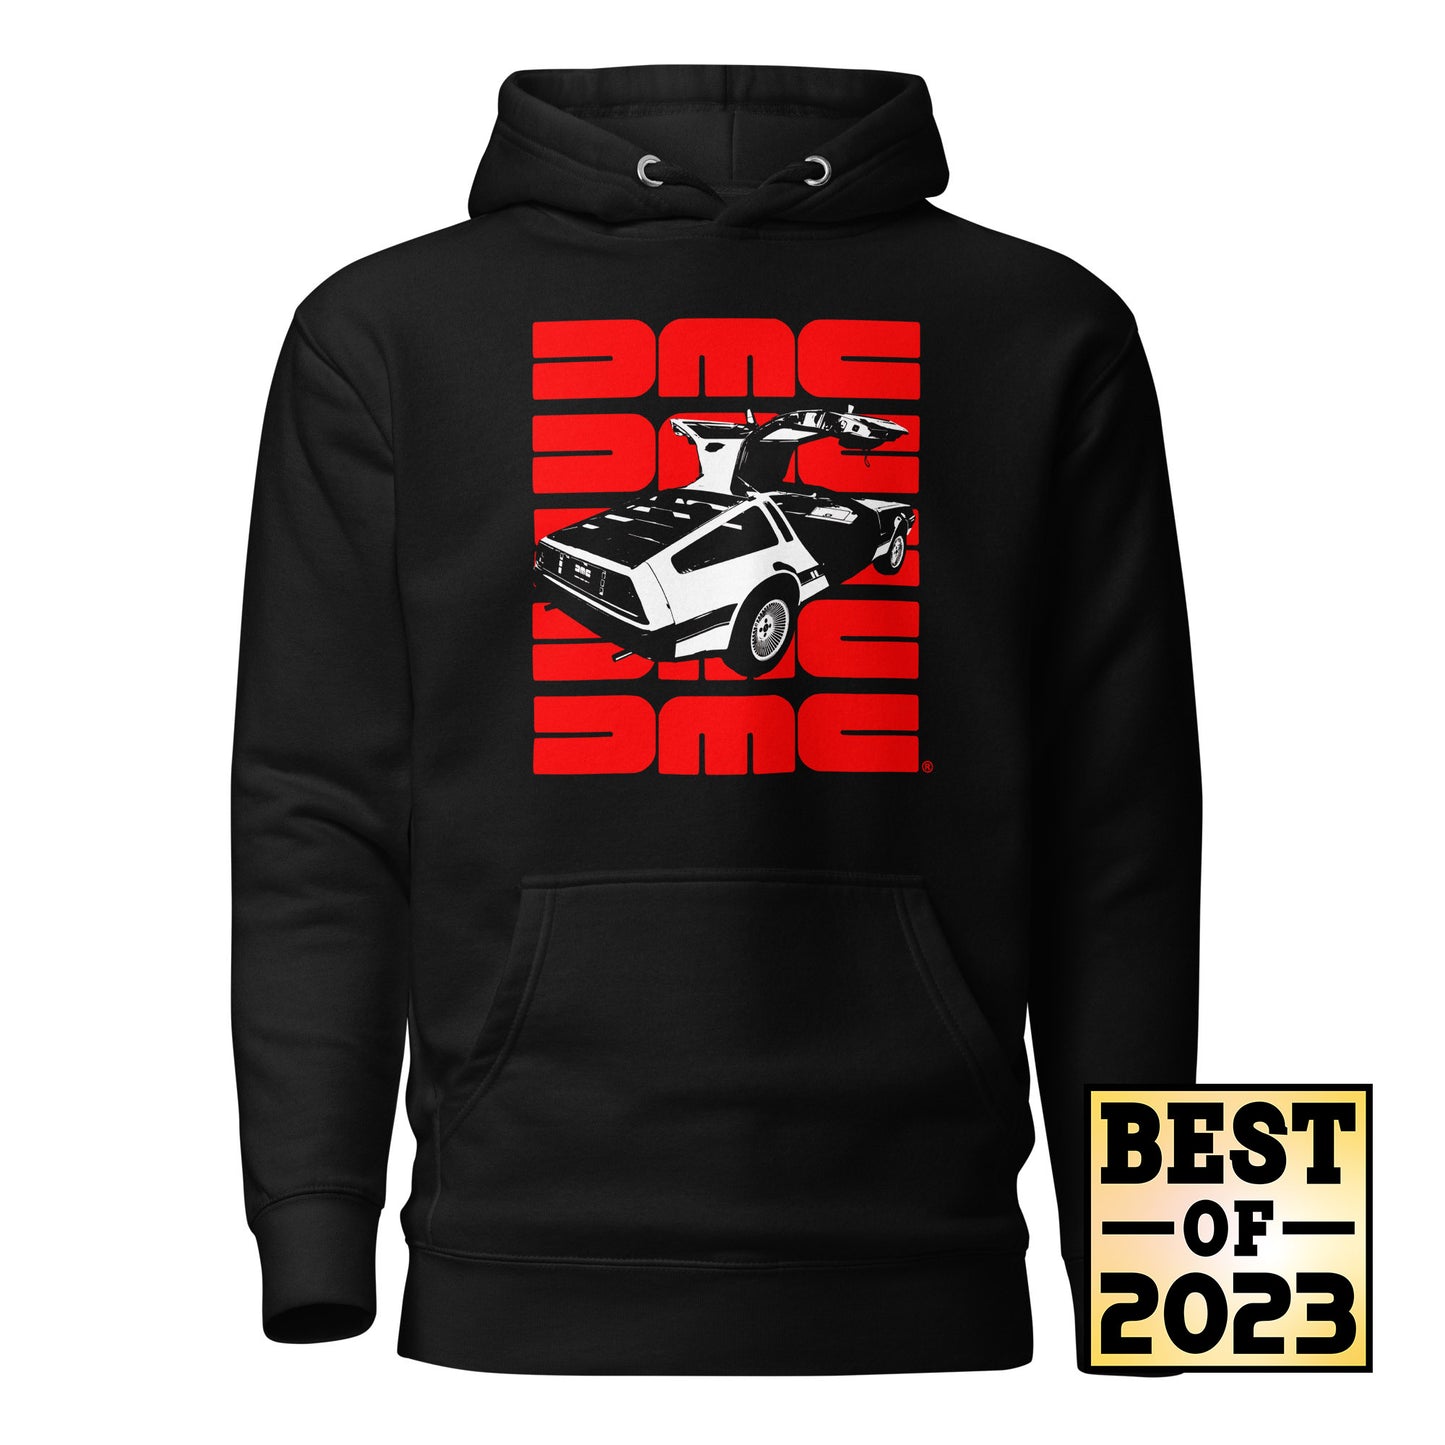 Black, White, and Red All Over (Blackout Edition) Hoodie